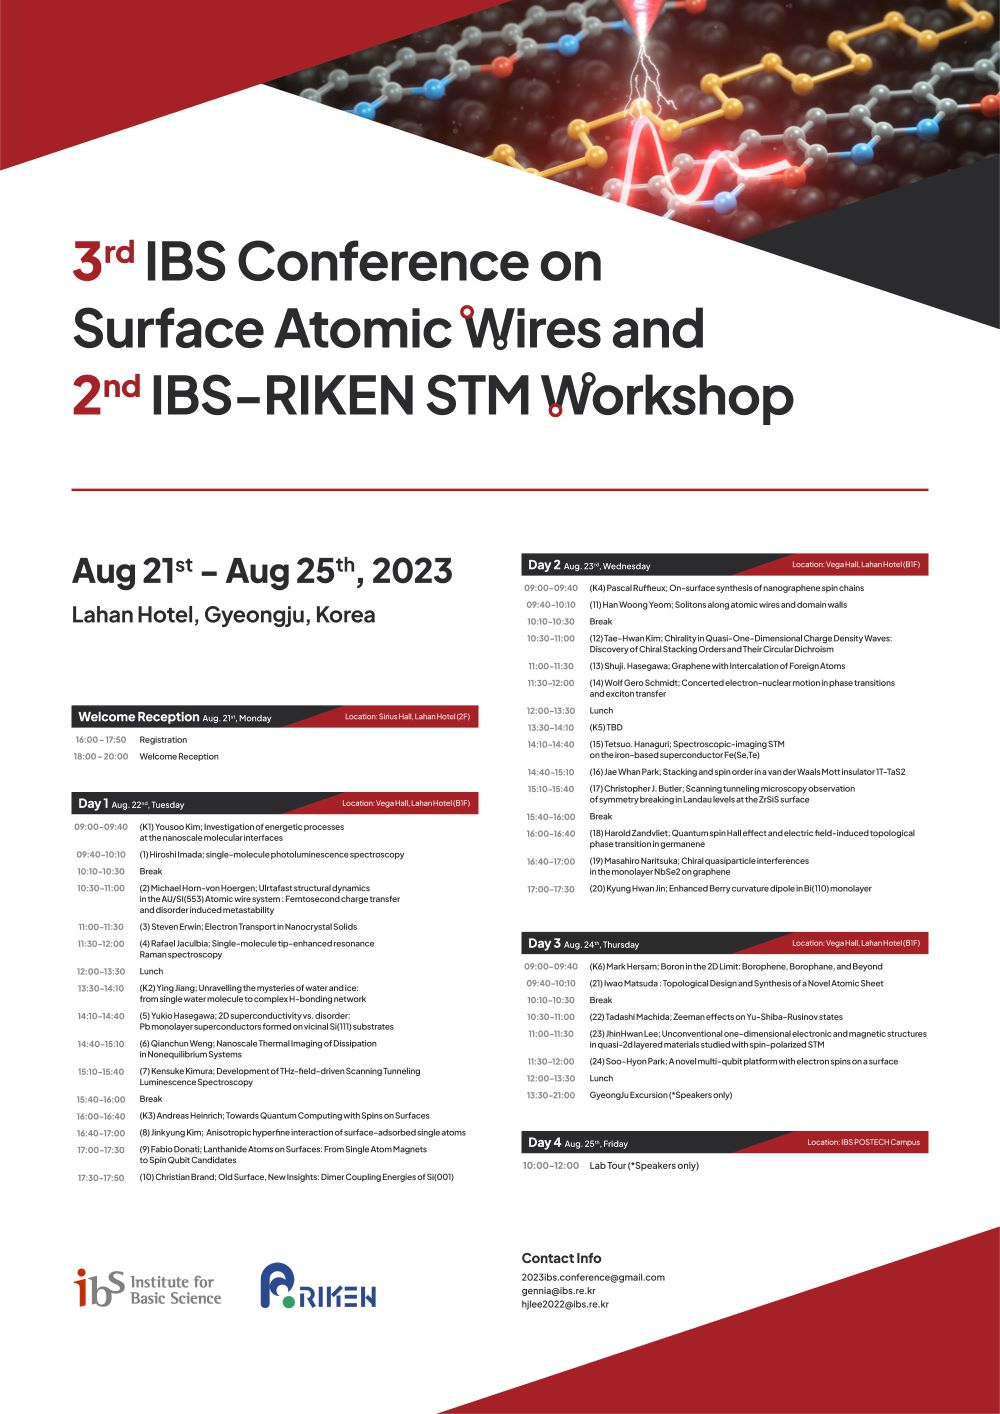 3rd IBS Conference on Surface Atomic Wires and 2nd IBS-RIKEN STM Workshop